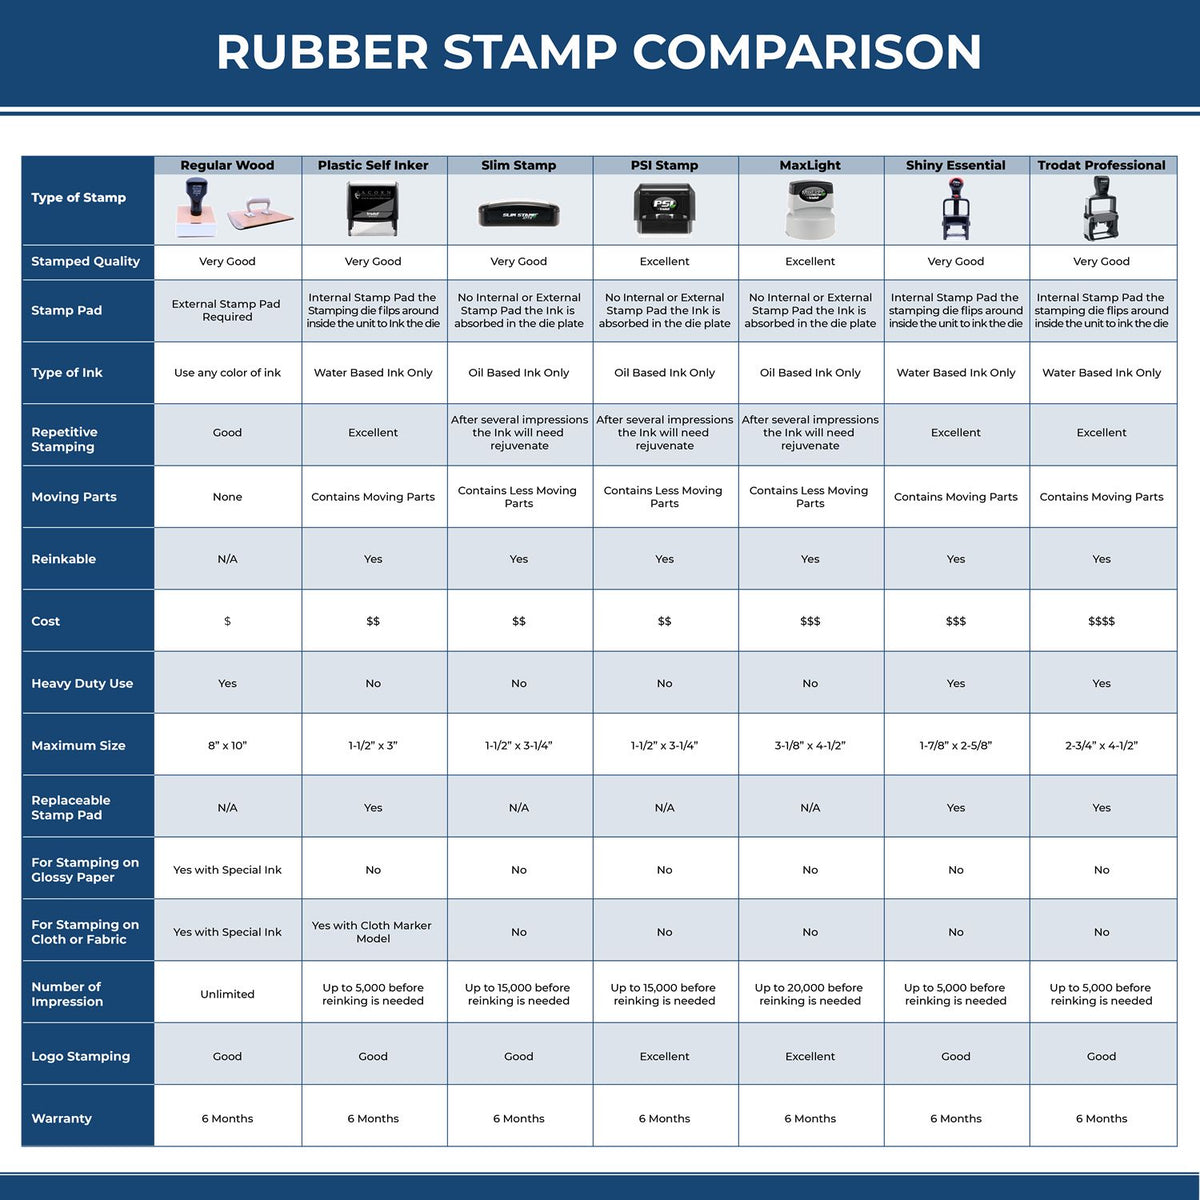 A comparison chart for the different types of mount models available for the Self-Inking Rectangular Arkansas Notary Stamp.